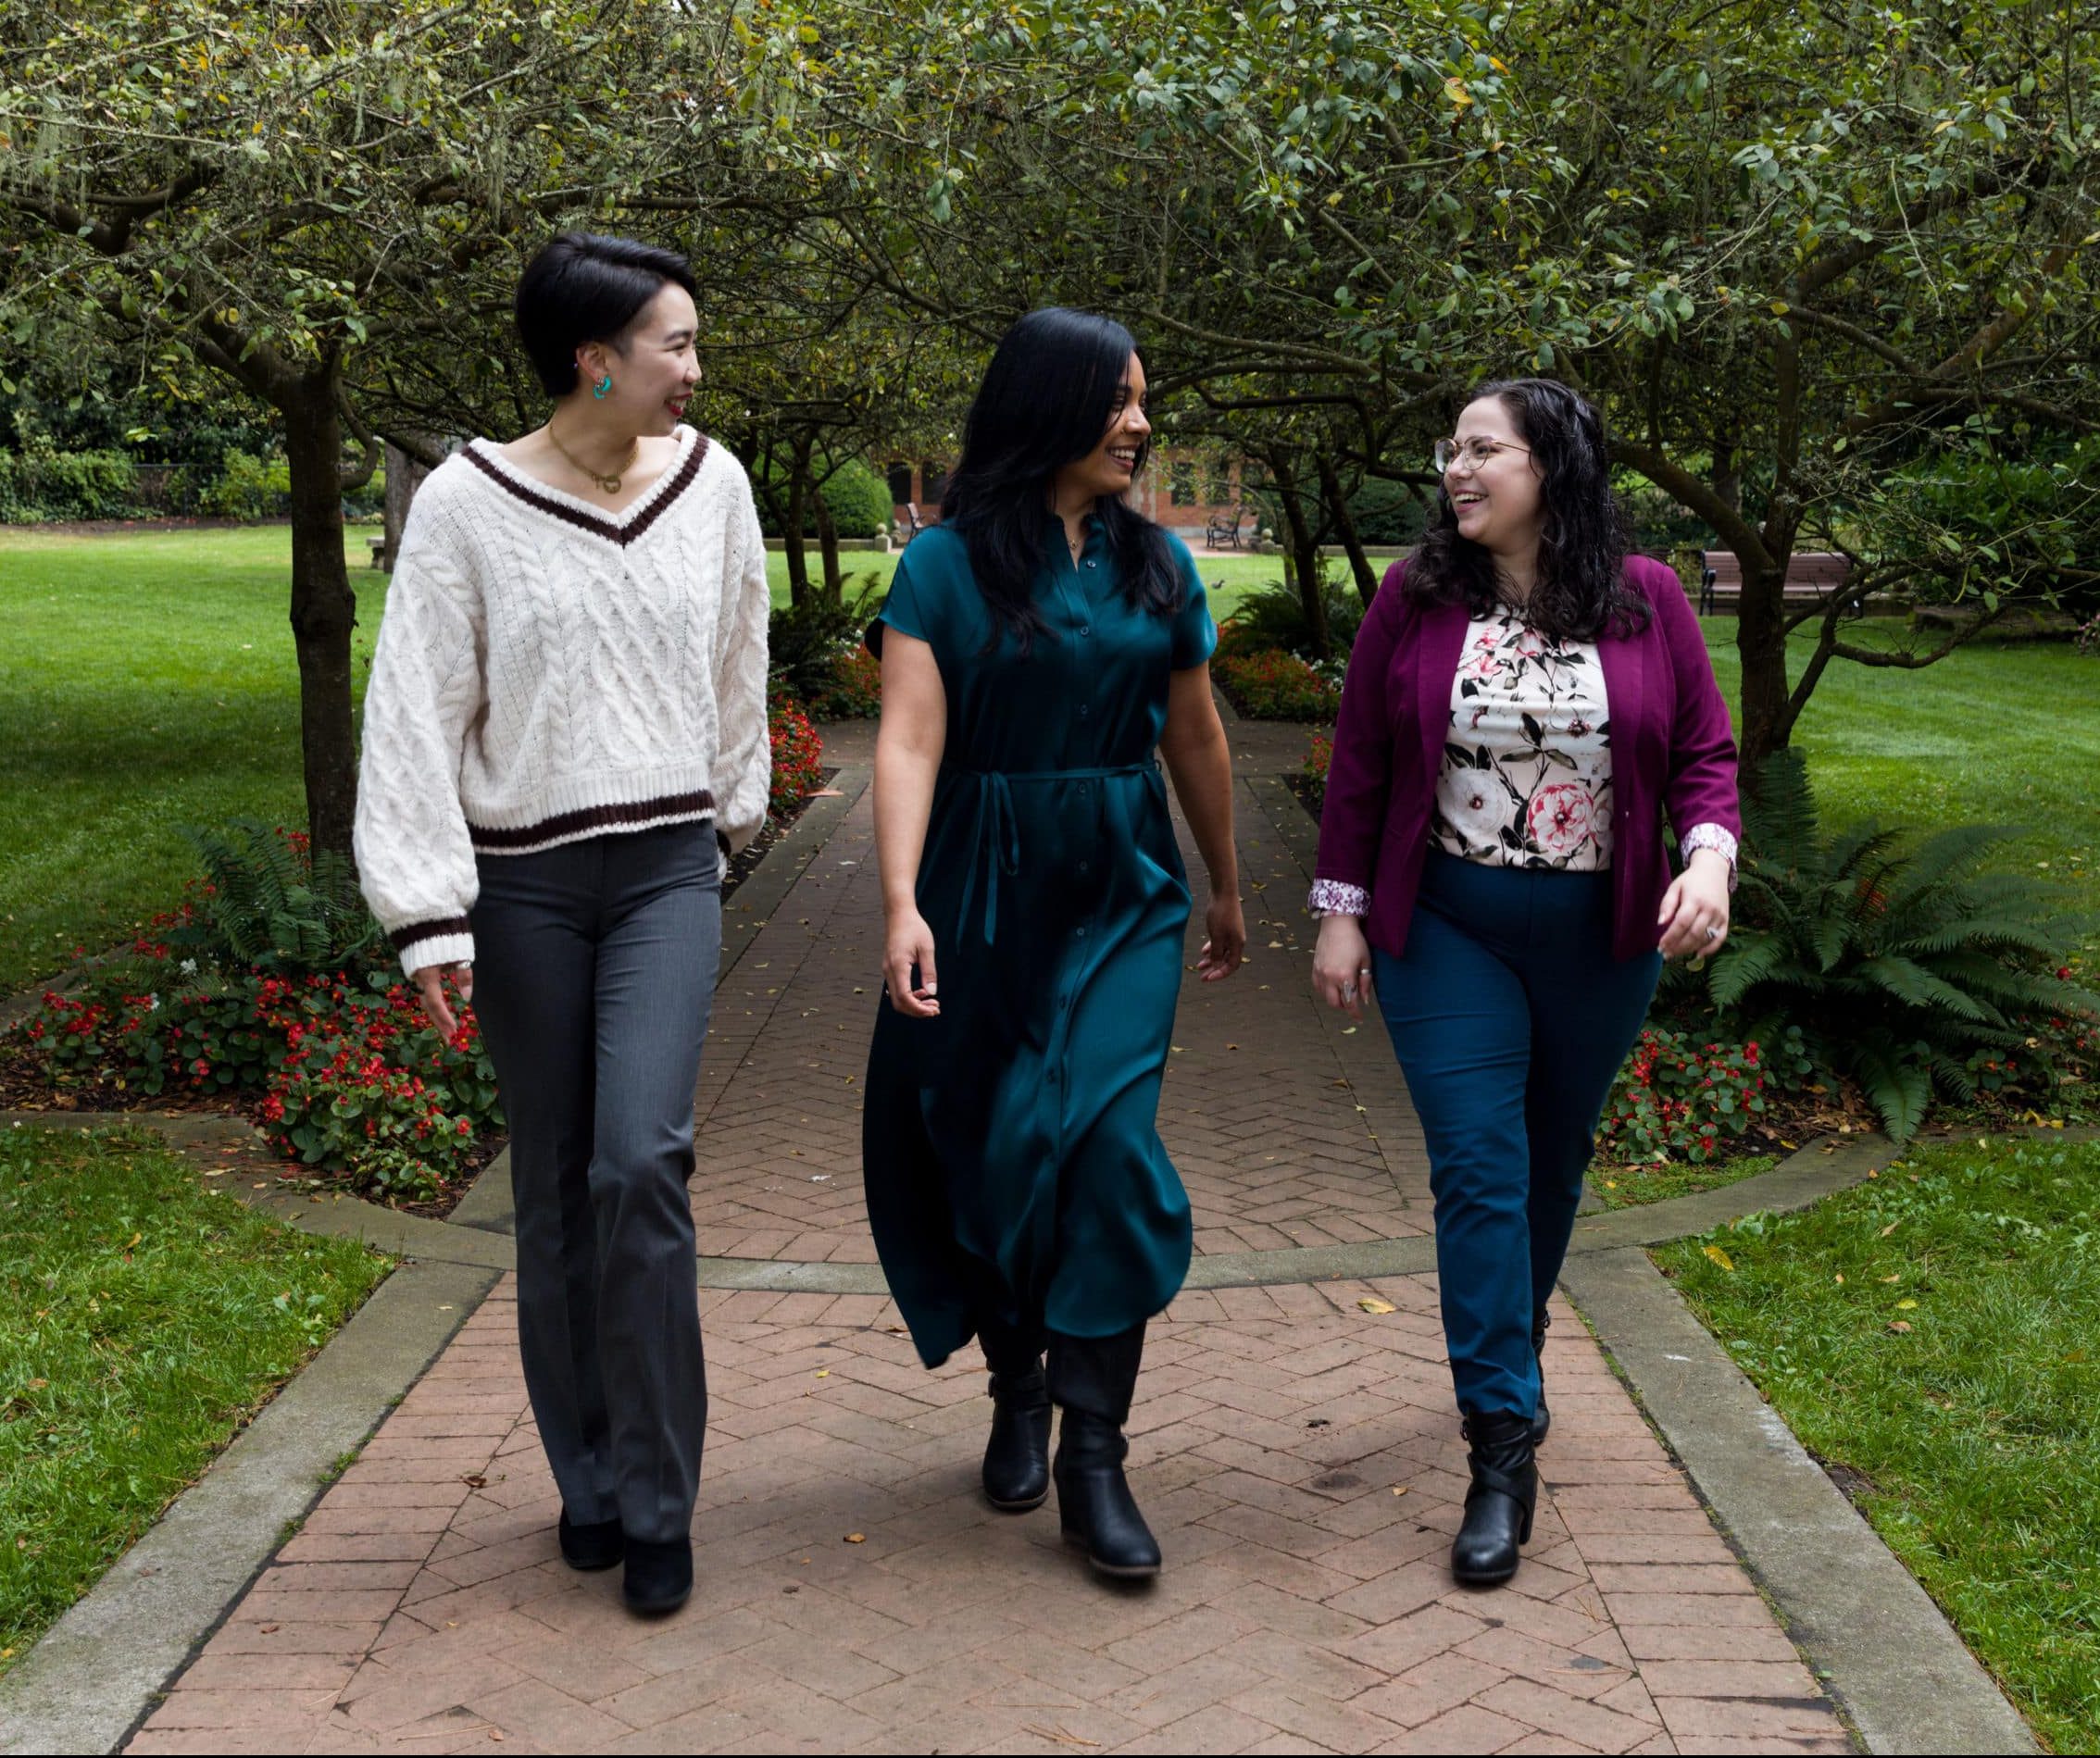 Three Stella Nova therapists walking together outside in Golden Gate Park in San Francisco, appearing to chat with each other.